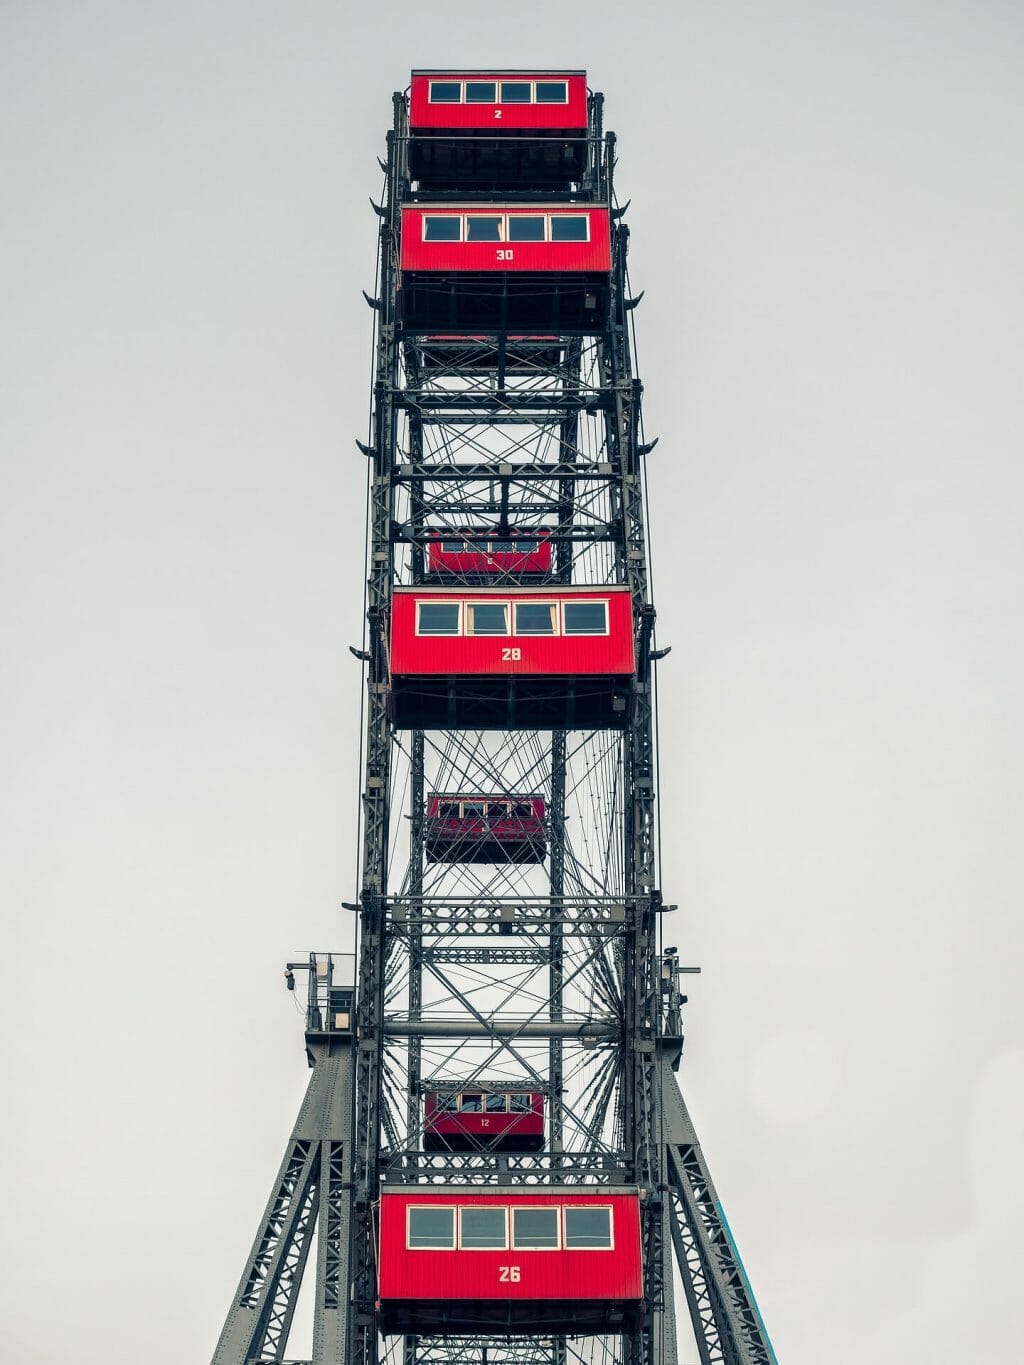 Side view of the Vienna ferris wheel with vibrant red cars on a gray day